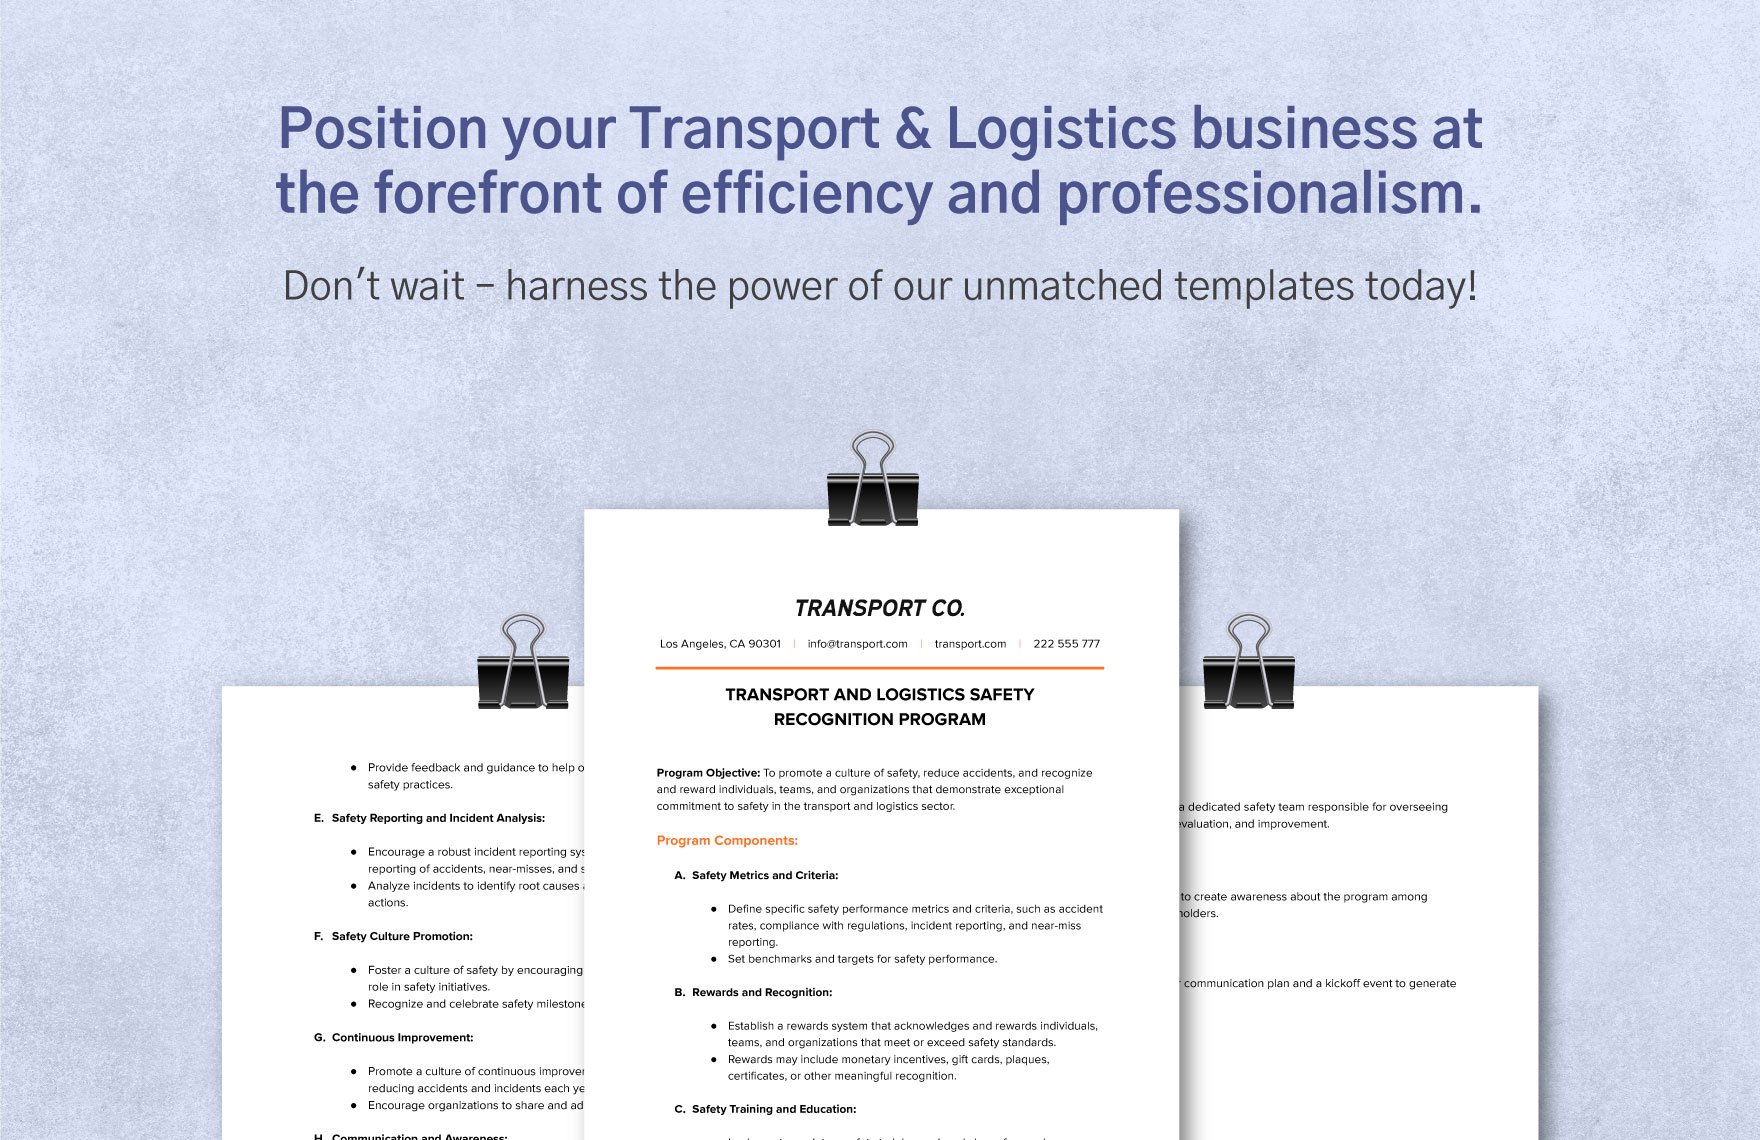 Transport and Logistics Safety Recognition Program Template